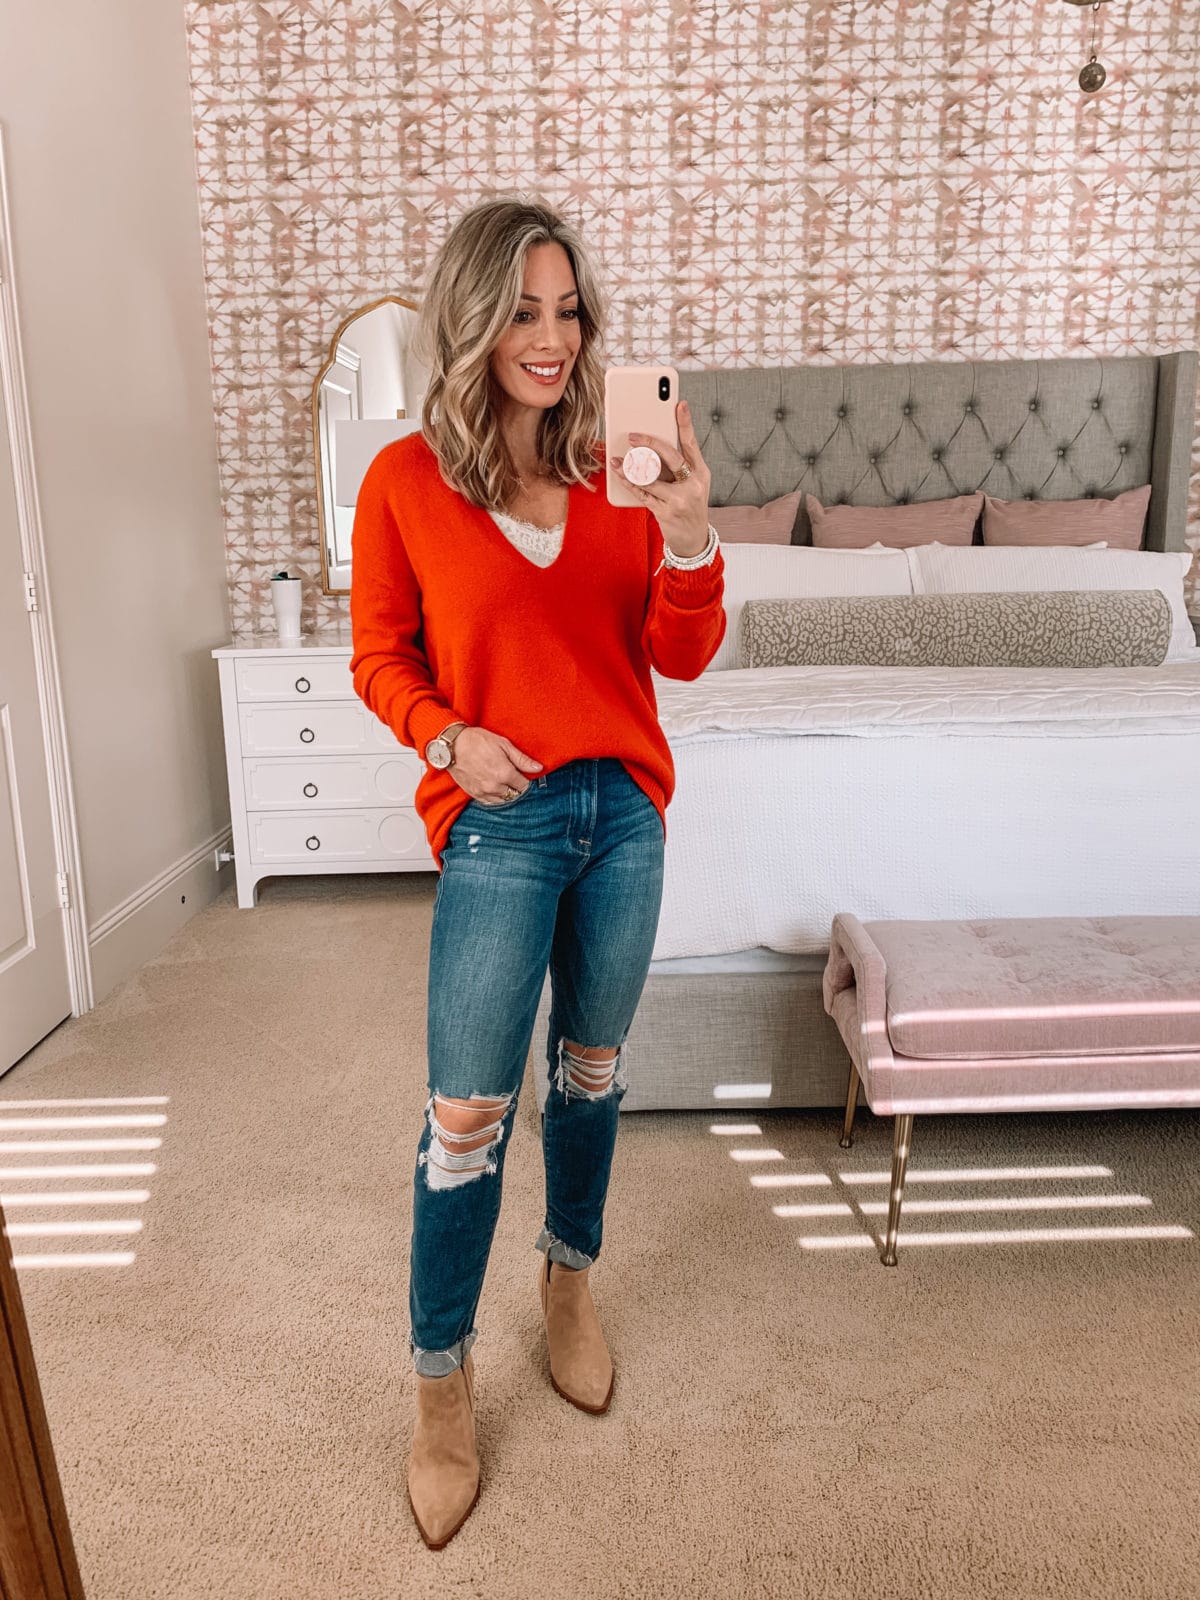 Dressing Room try on Nordstrom, V Neck Sweater, Jeans, Booties 